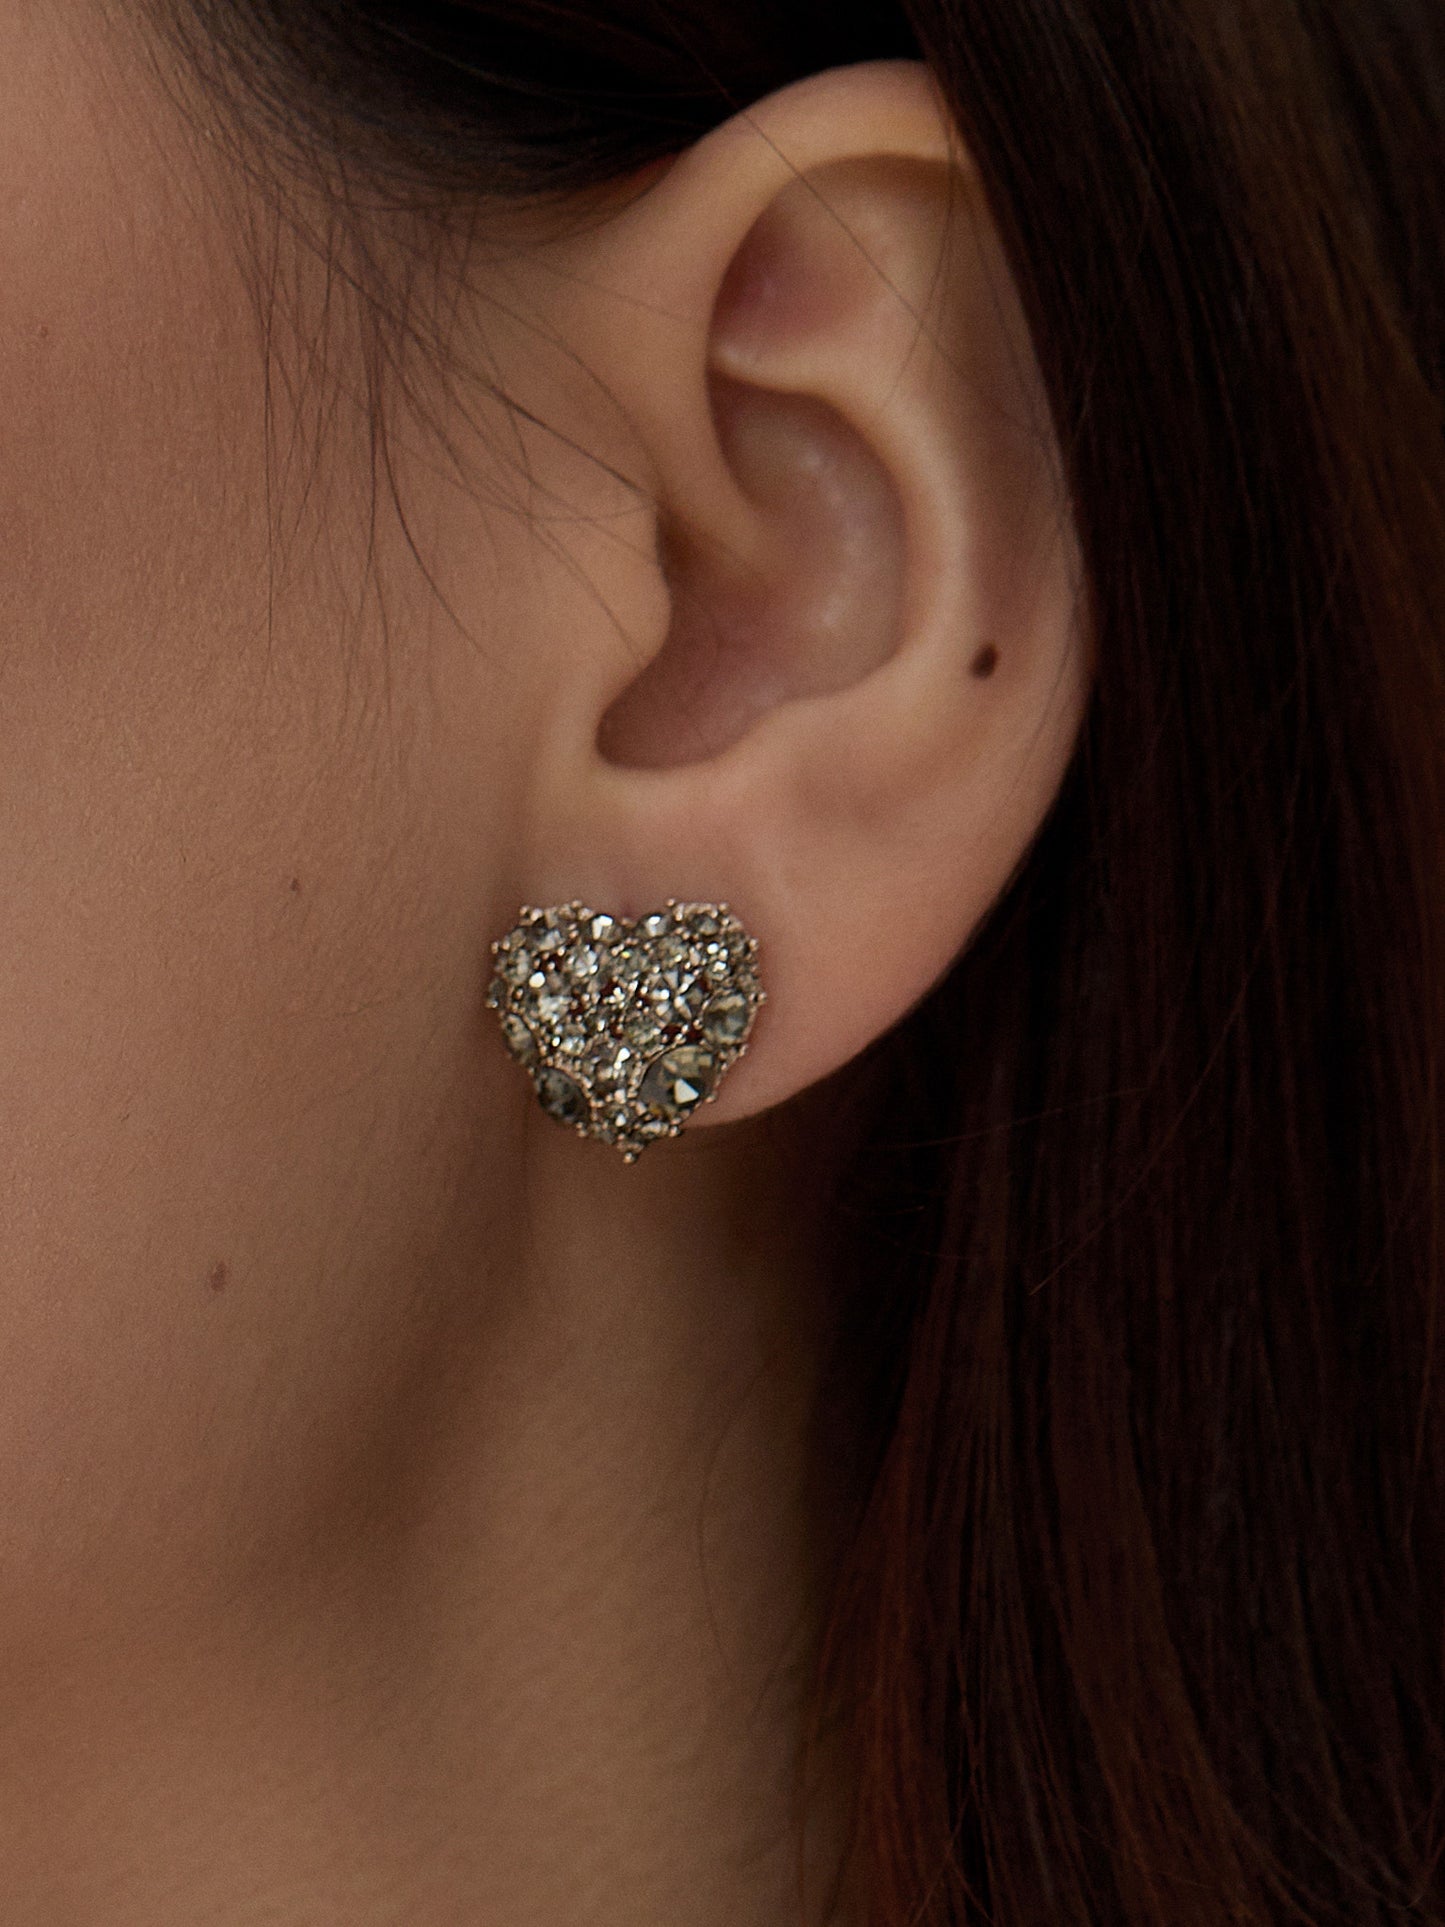 14K Gold Platted Dazzle Earring